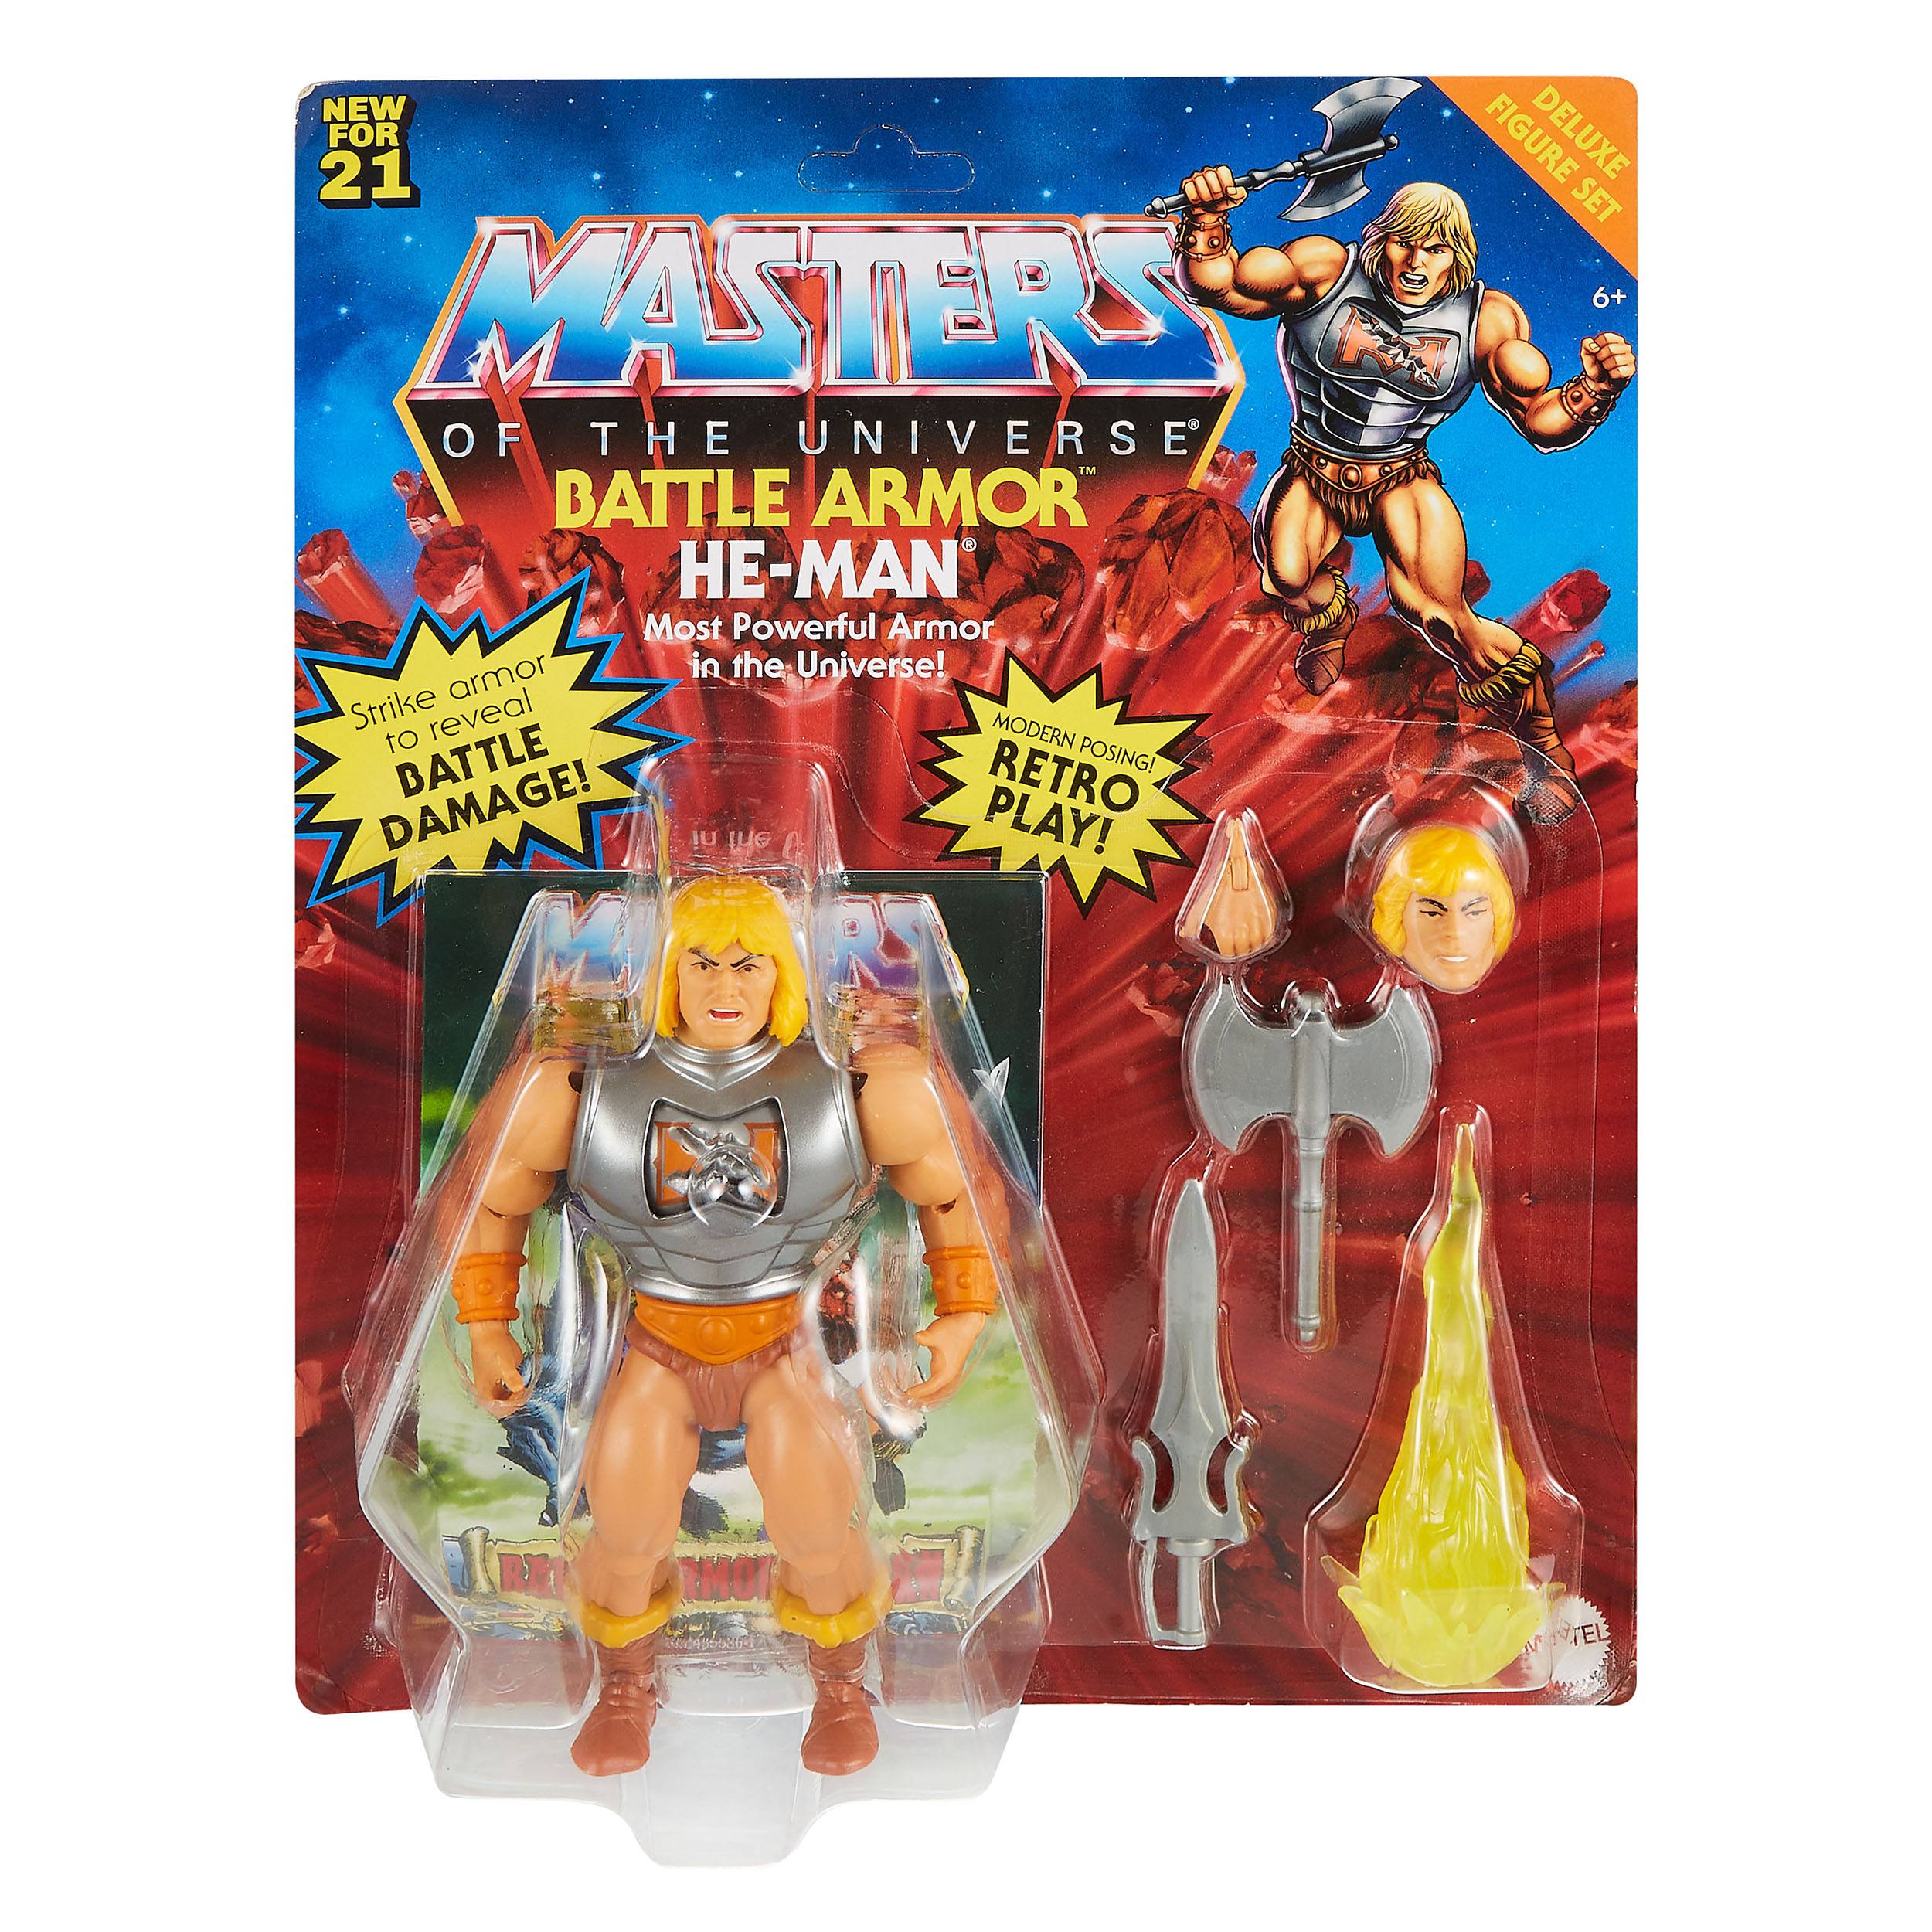 Masters of the Universe Deluxe Actionfigur 2021 He-Man 14 cm MATTGVL76 887961929652